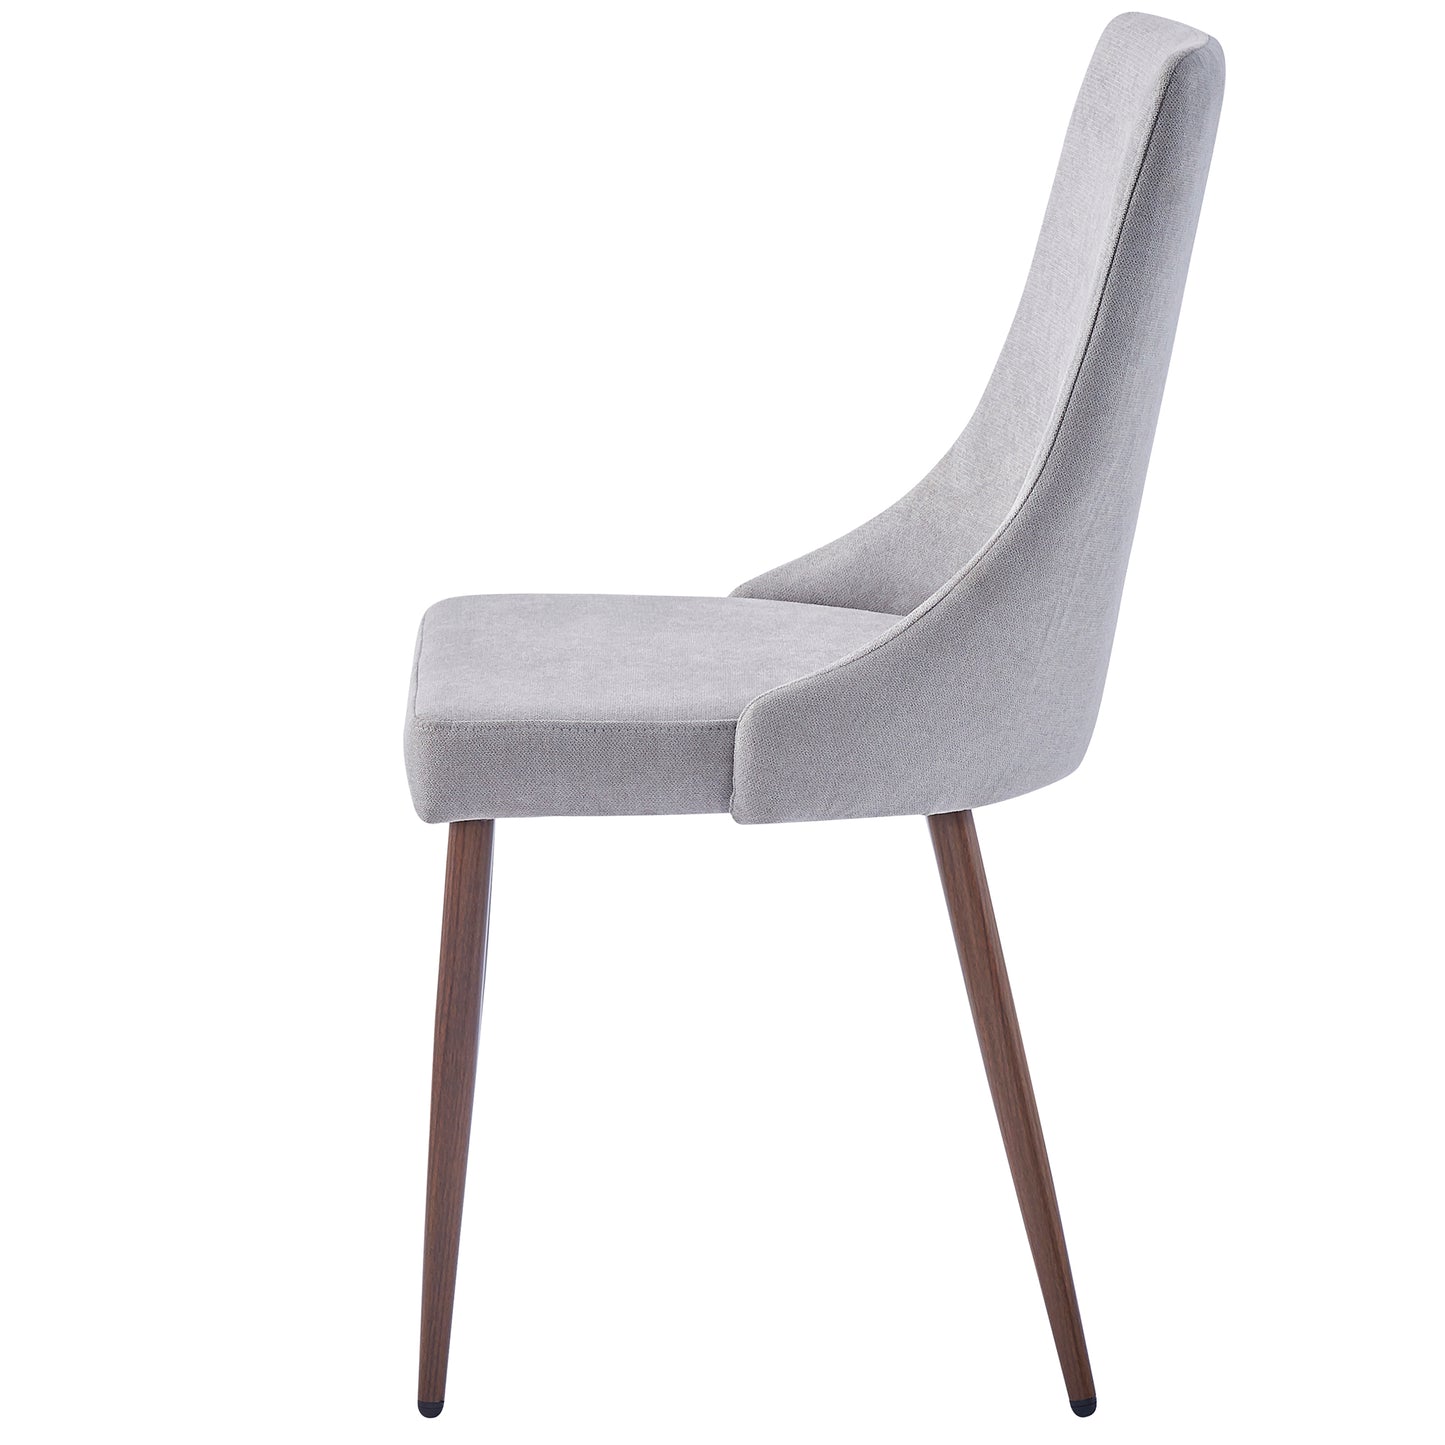 Cora Fabric Side Chair, Set of 2 in Grey and Walnut